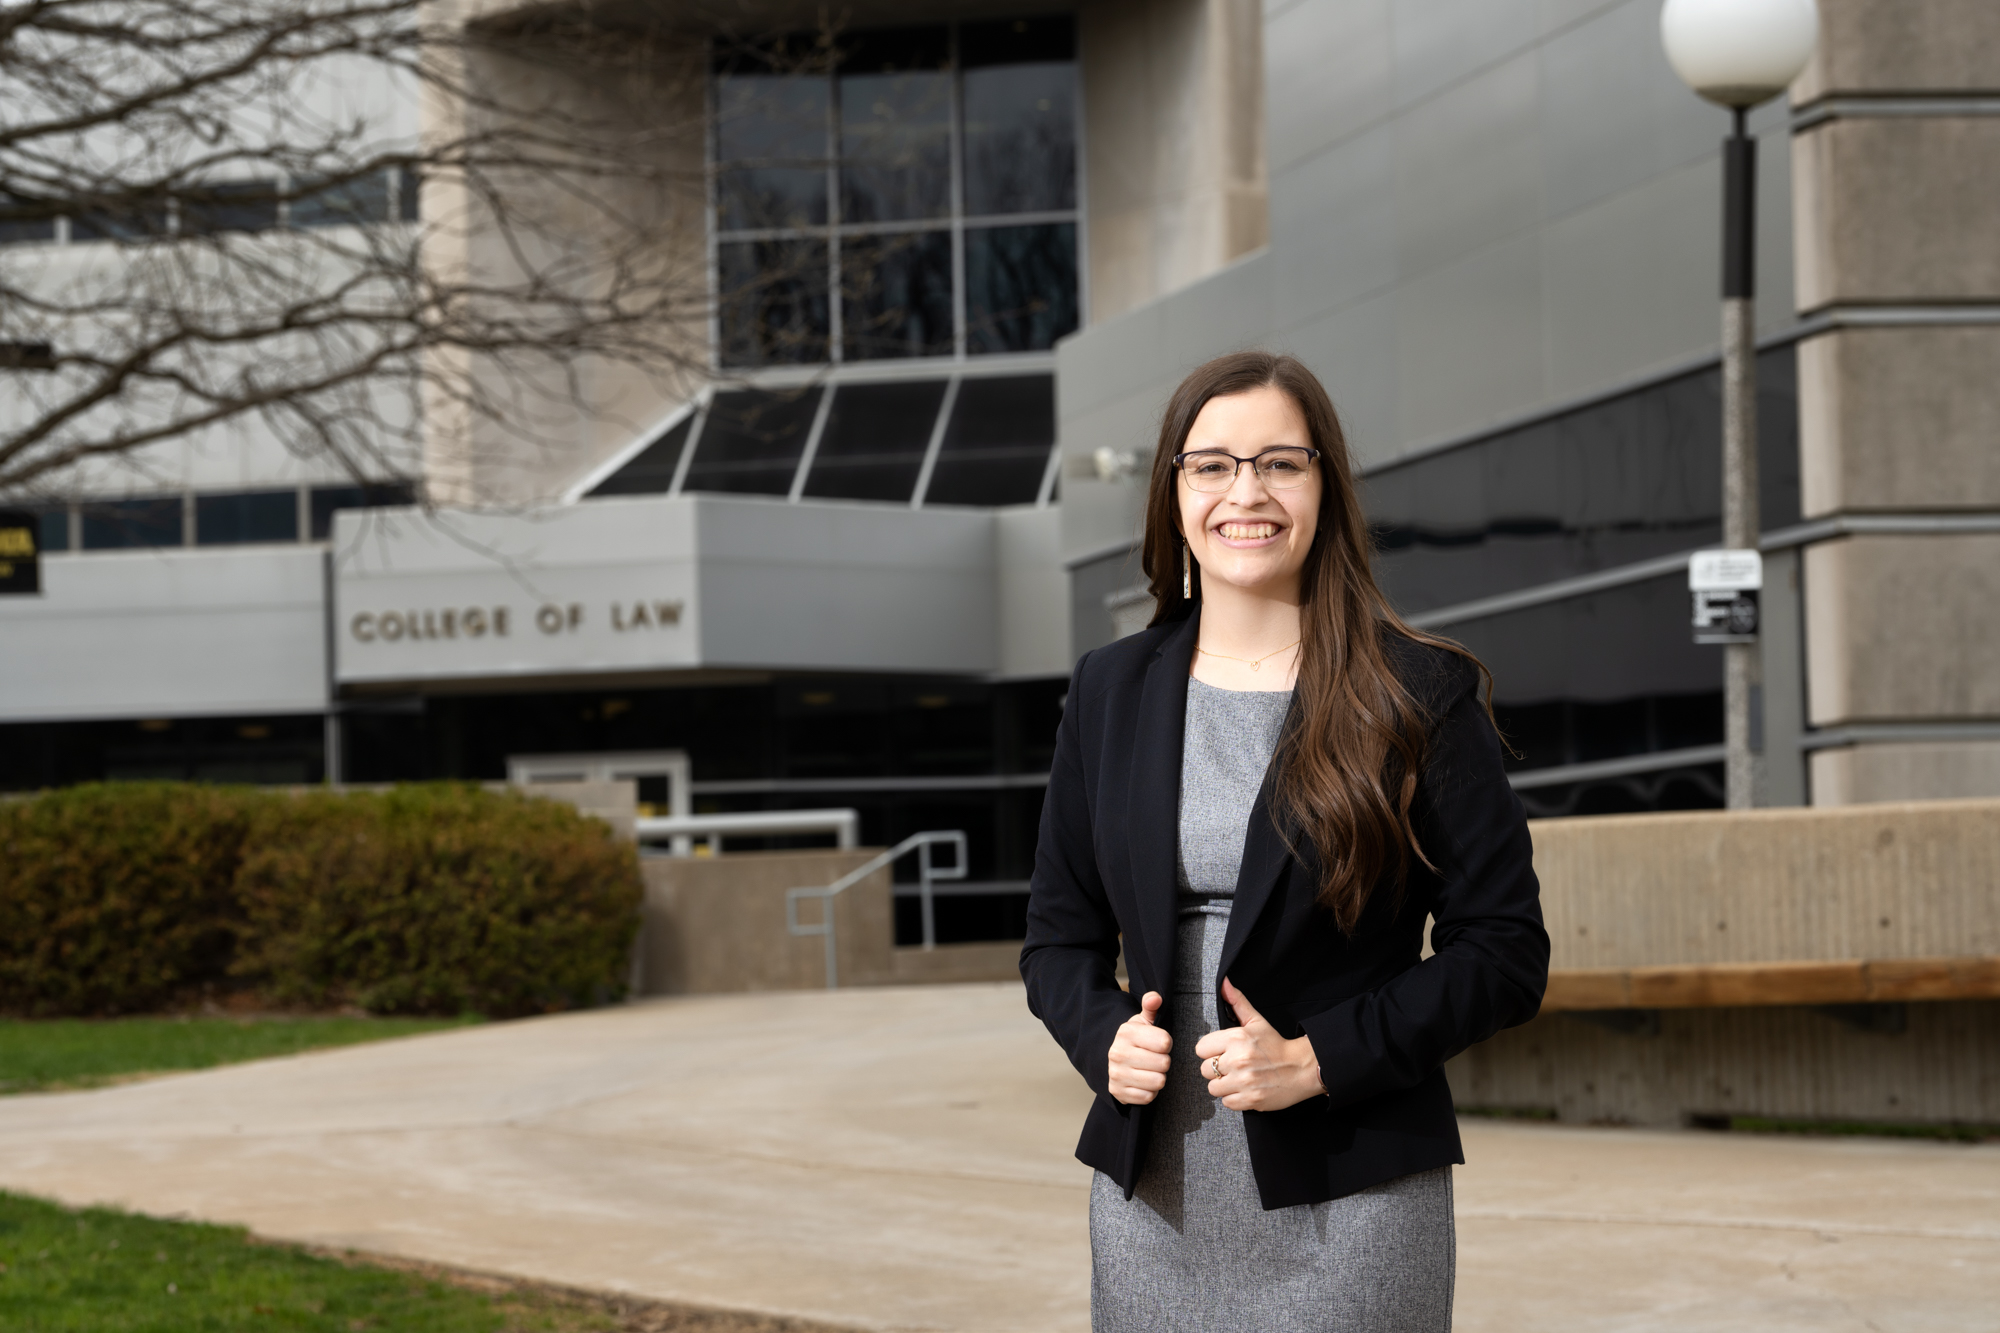 College of Law Student, Kayla Boyd poses in a business suit